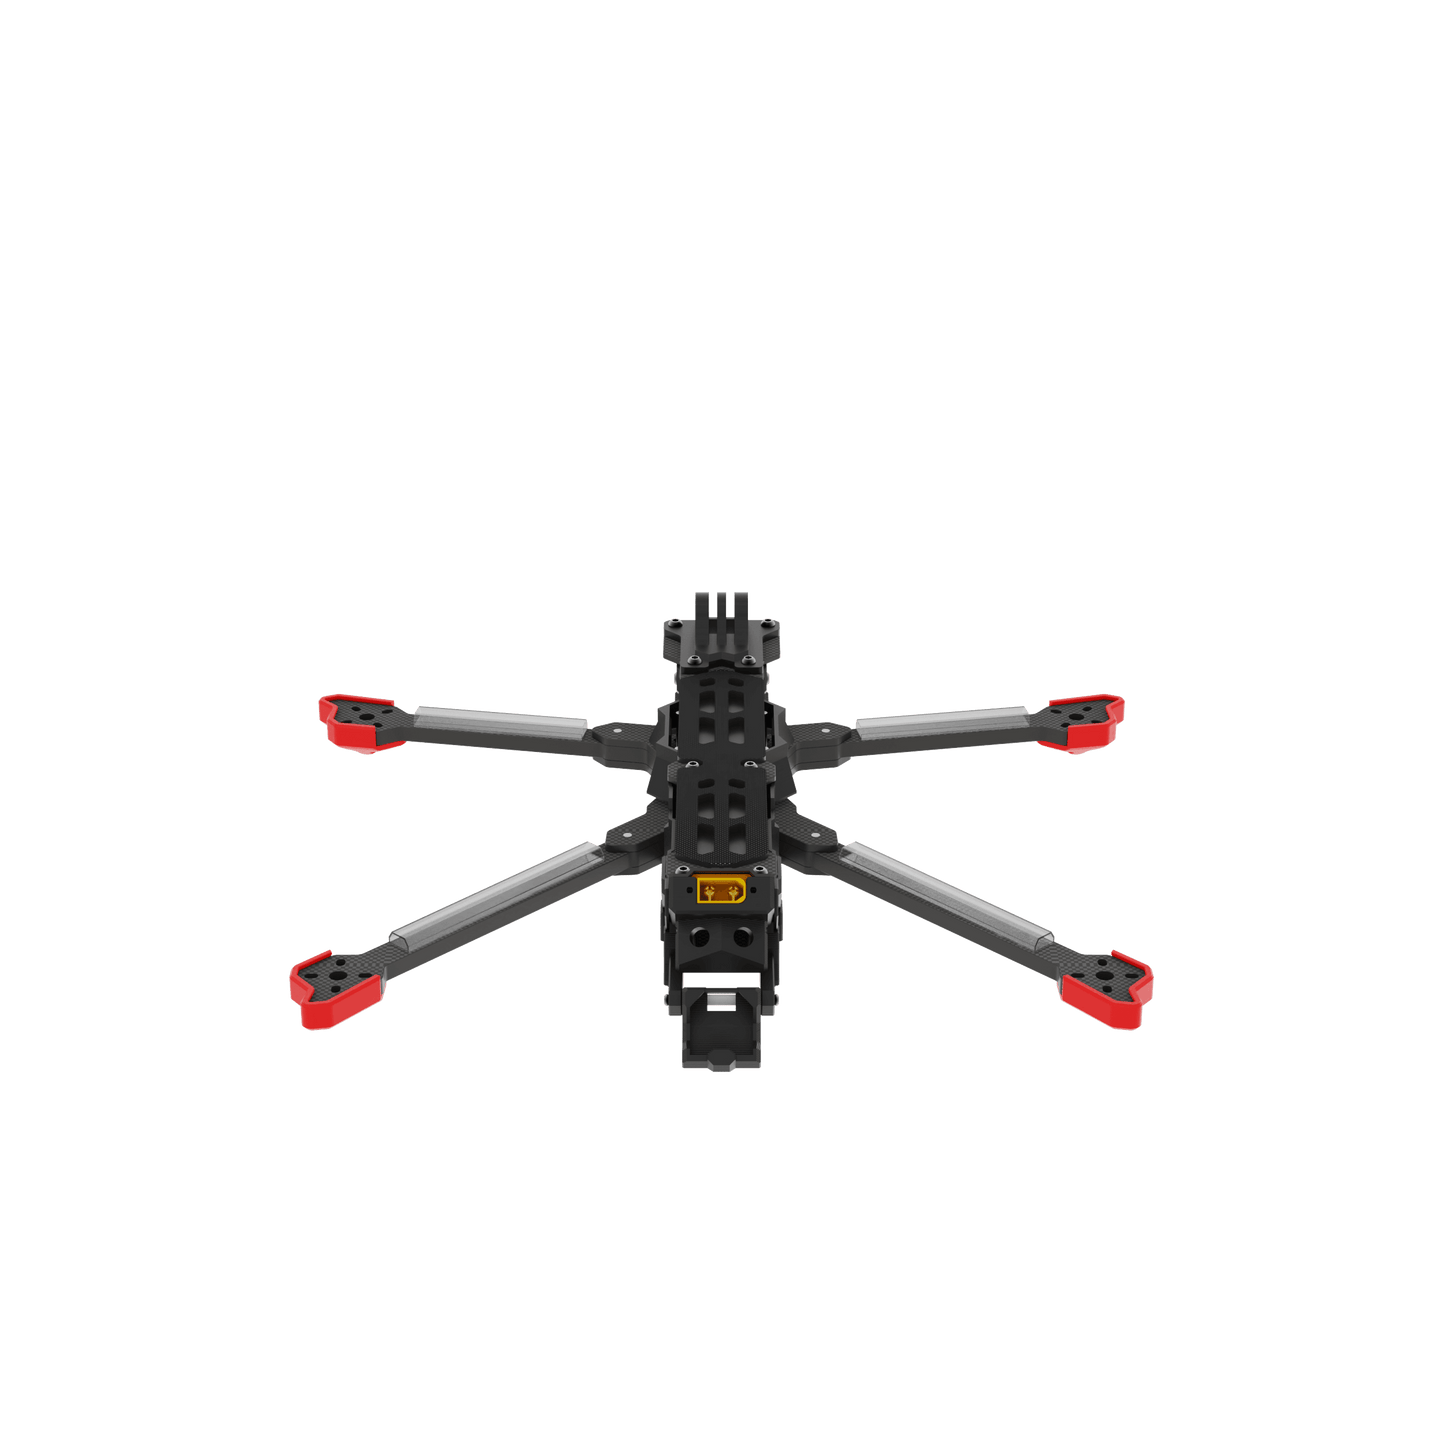 iFlight Chimera7 Pro V2 7.5inch Frame Long Range Frame Kit with 6mm arm for DJI O3 Air Unit Mount FPV Racing parts - RCDrone